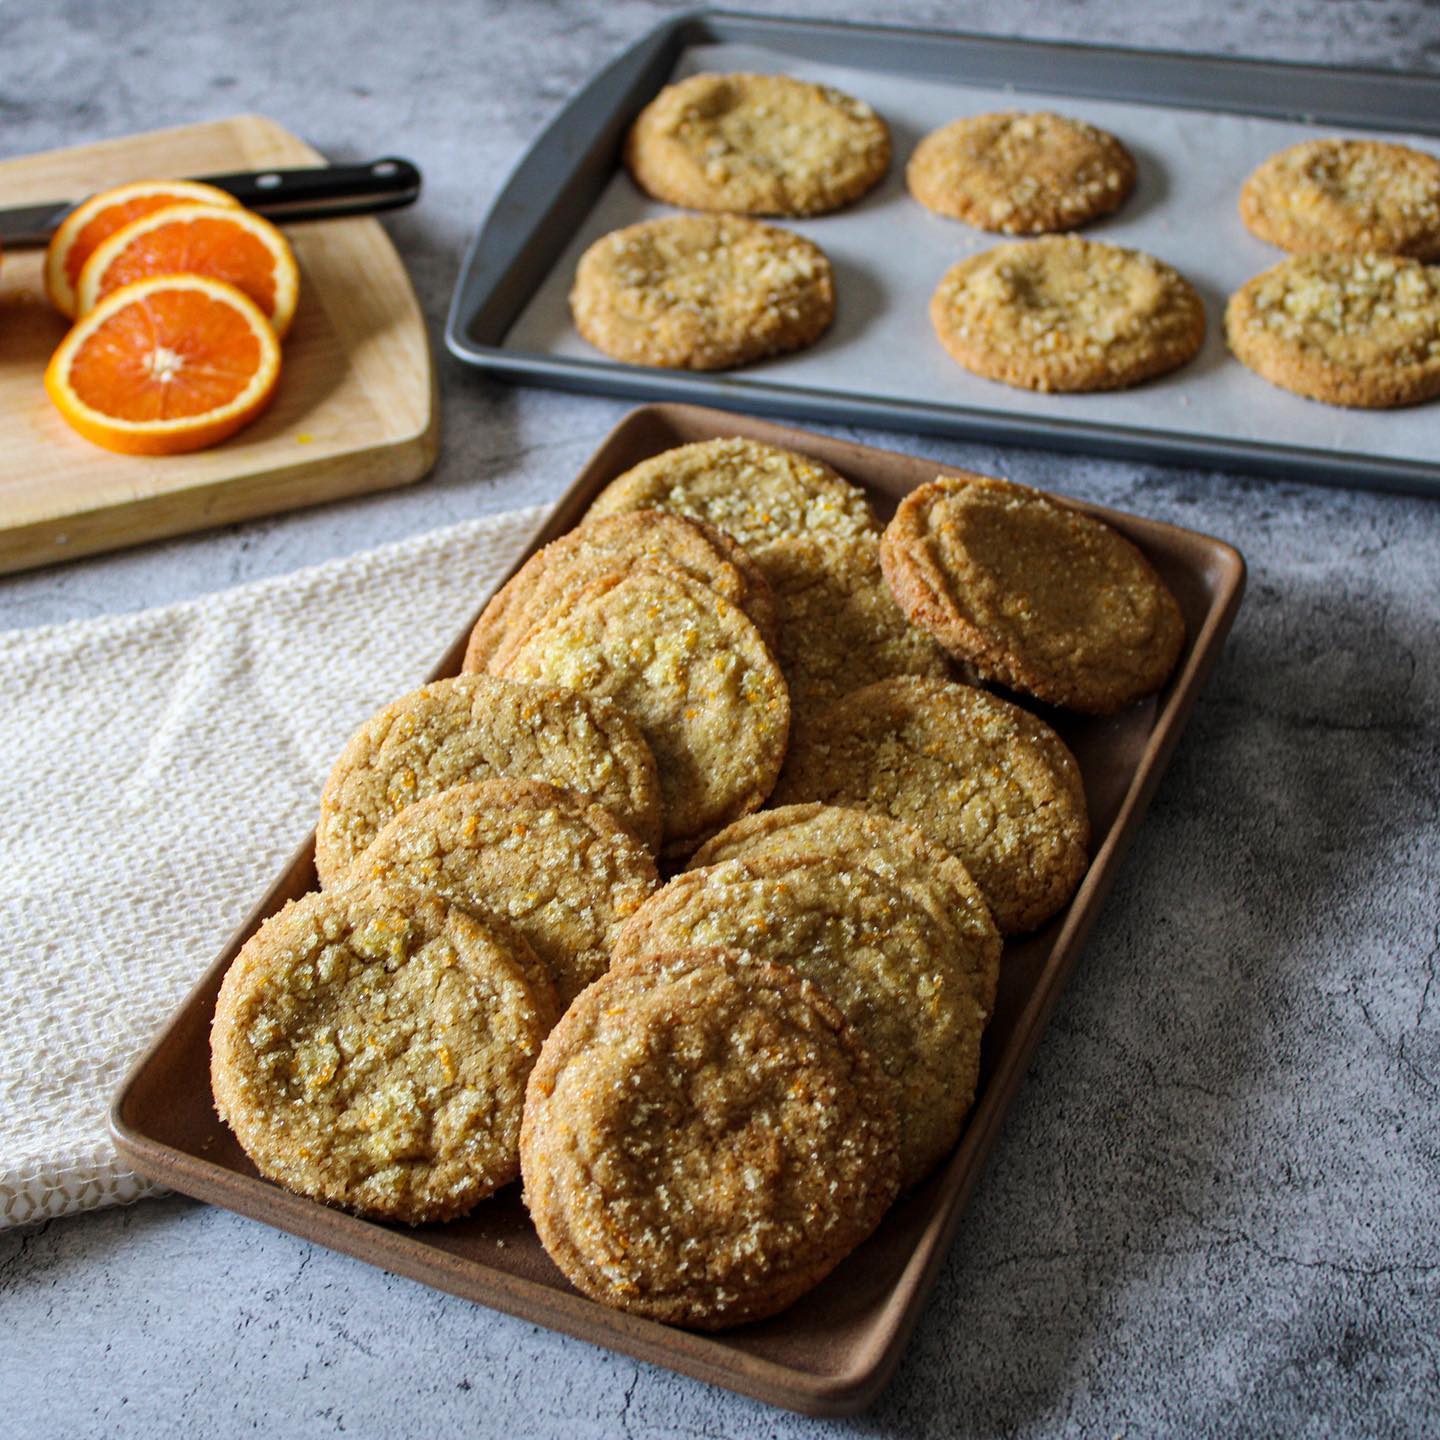 Brown sugar cookies? Good! Brown sugar cookies rolled in citrus sugar? Even better!! 

It’s the tail end of citrus season, so make these brown sugar citrus cookies before it’s too late! While you’re at it, make some extra and keep a stash in the freezer! 

Recipe is up on the site! Link up in bio. 
__

https://crispandcrumble.com/brown-sugar-citrus-cookies/